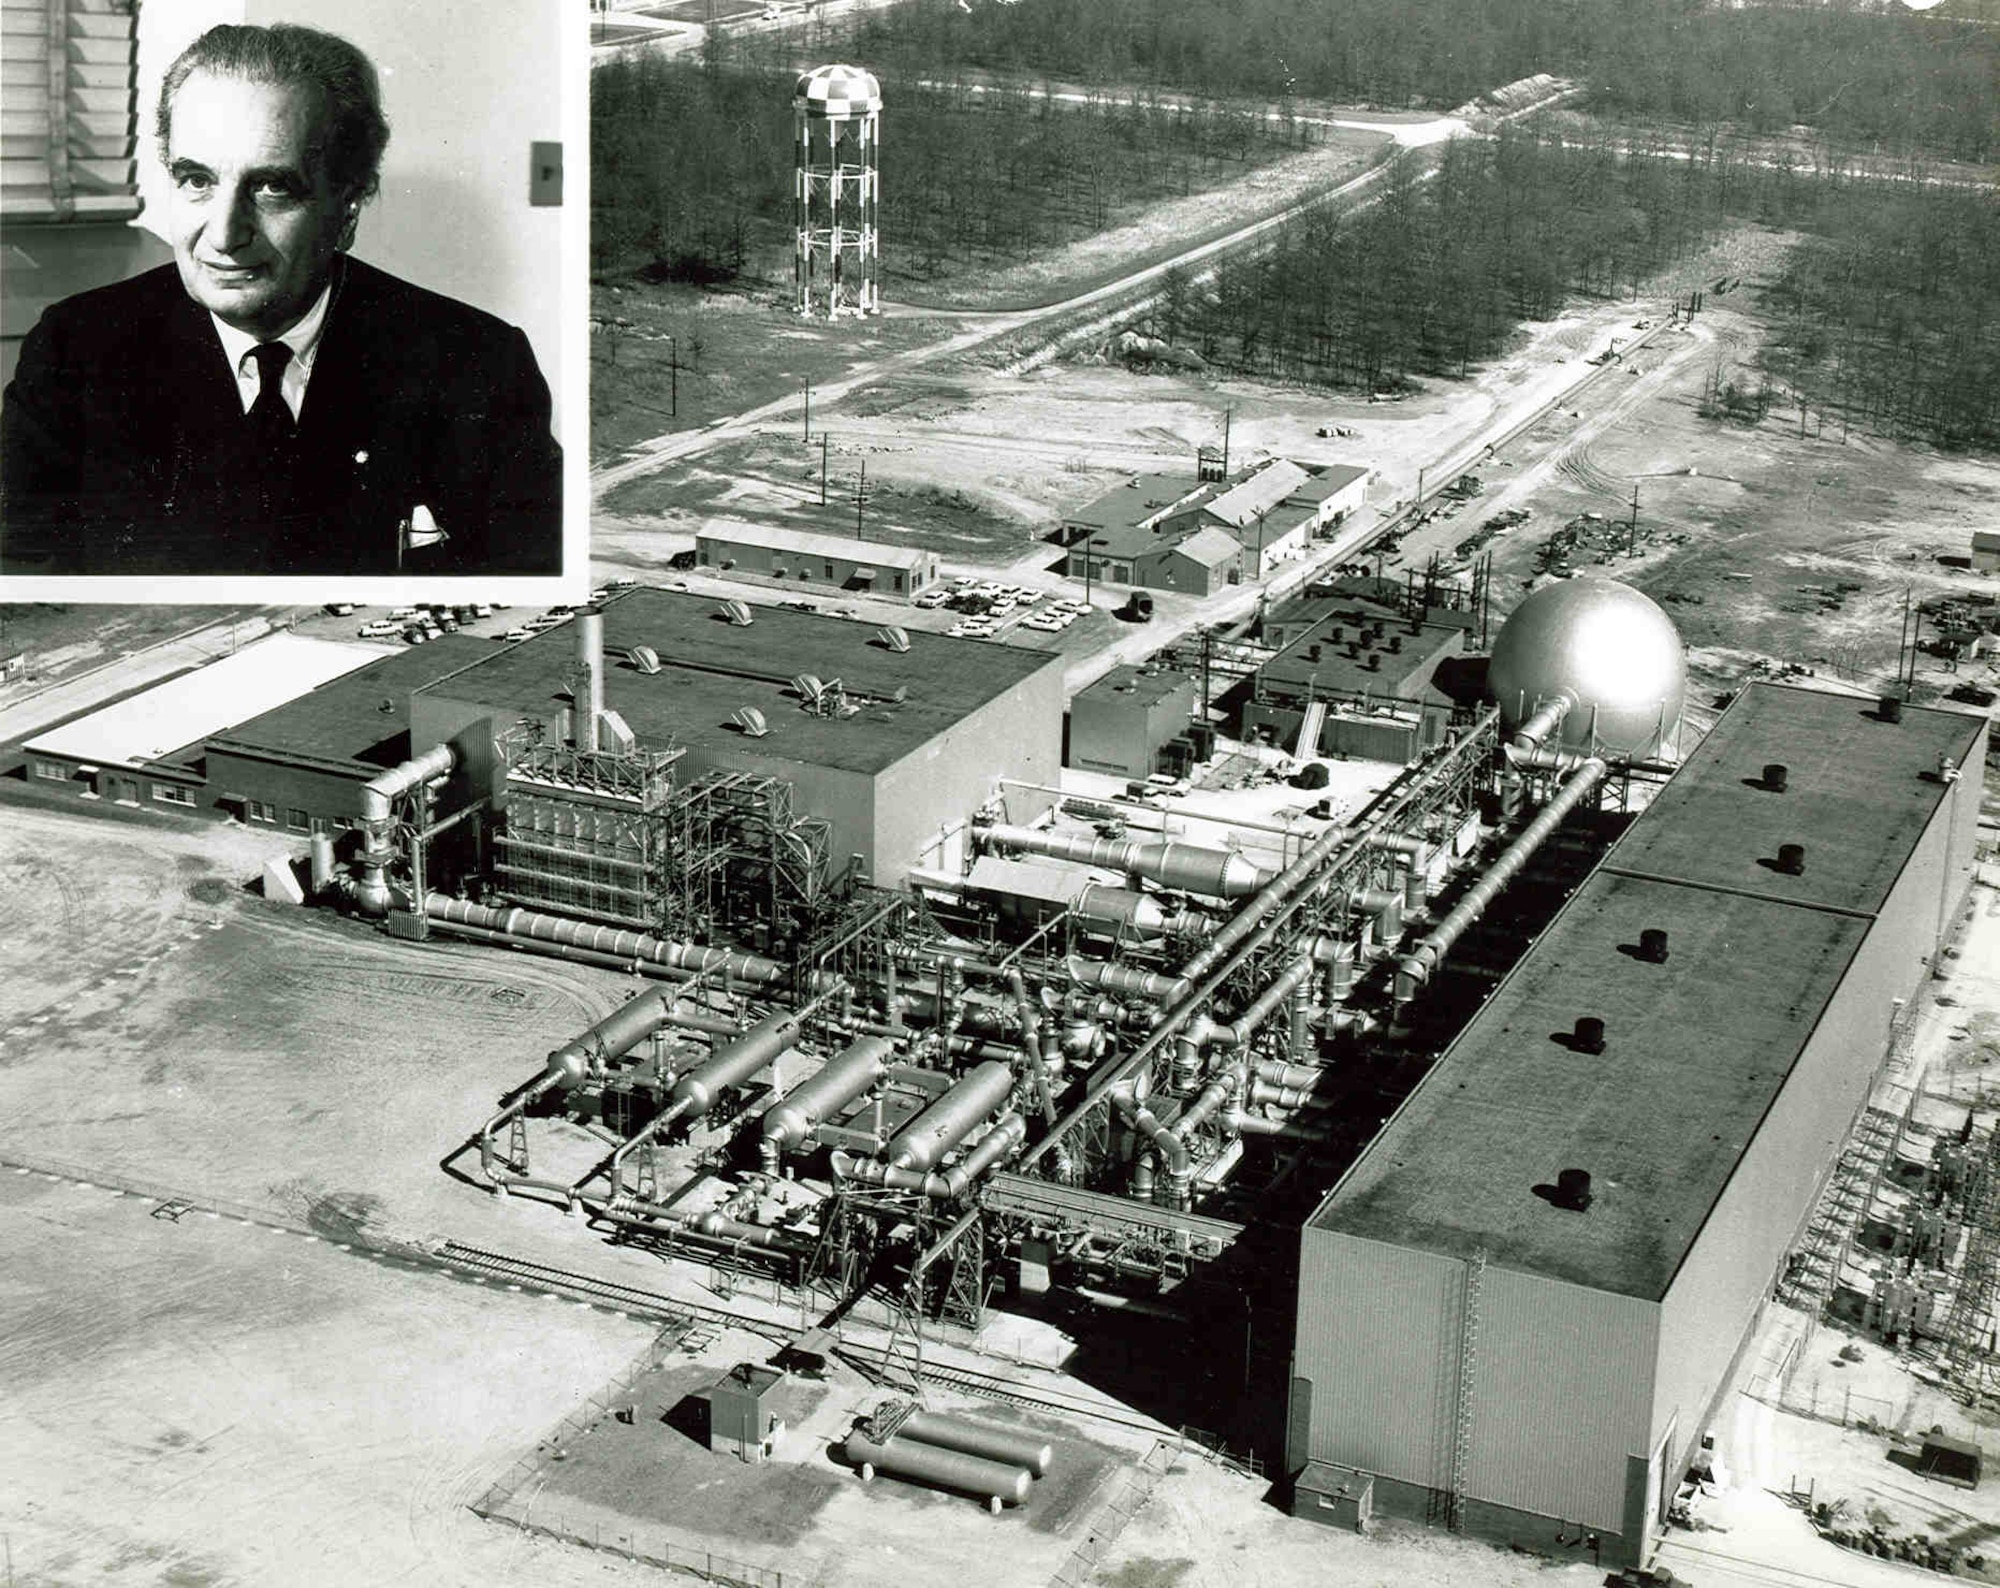 The Gas Dynamics Facility at Arnold Air Force Base was dedicated in honor of Dr. Theodore von Kármán on Oct. 30, 1959. Von Kármán helped provide the blueprint that led to the construction of Arnold Engineering Development Complex at Arnold AFB. (U.S. Air Force photo)